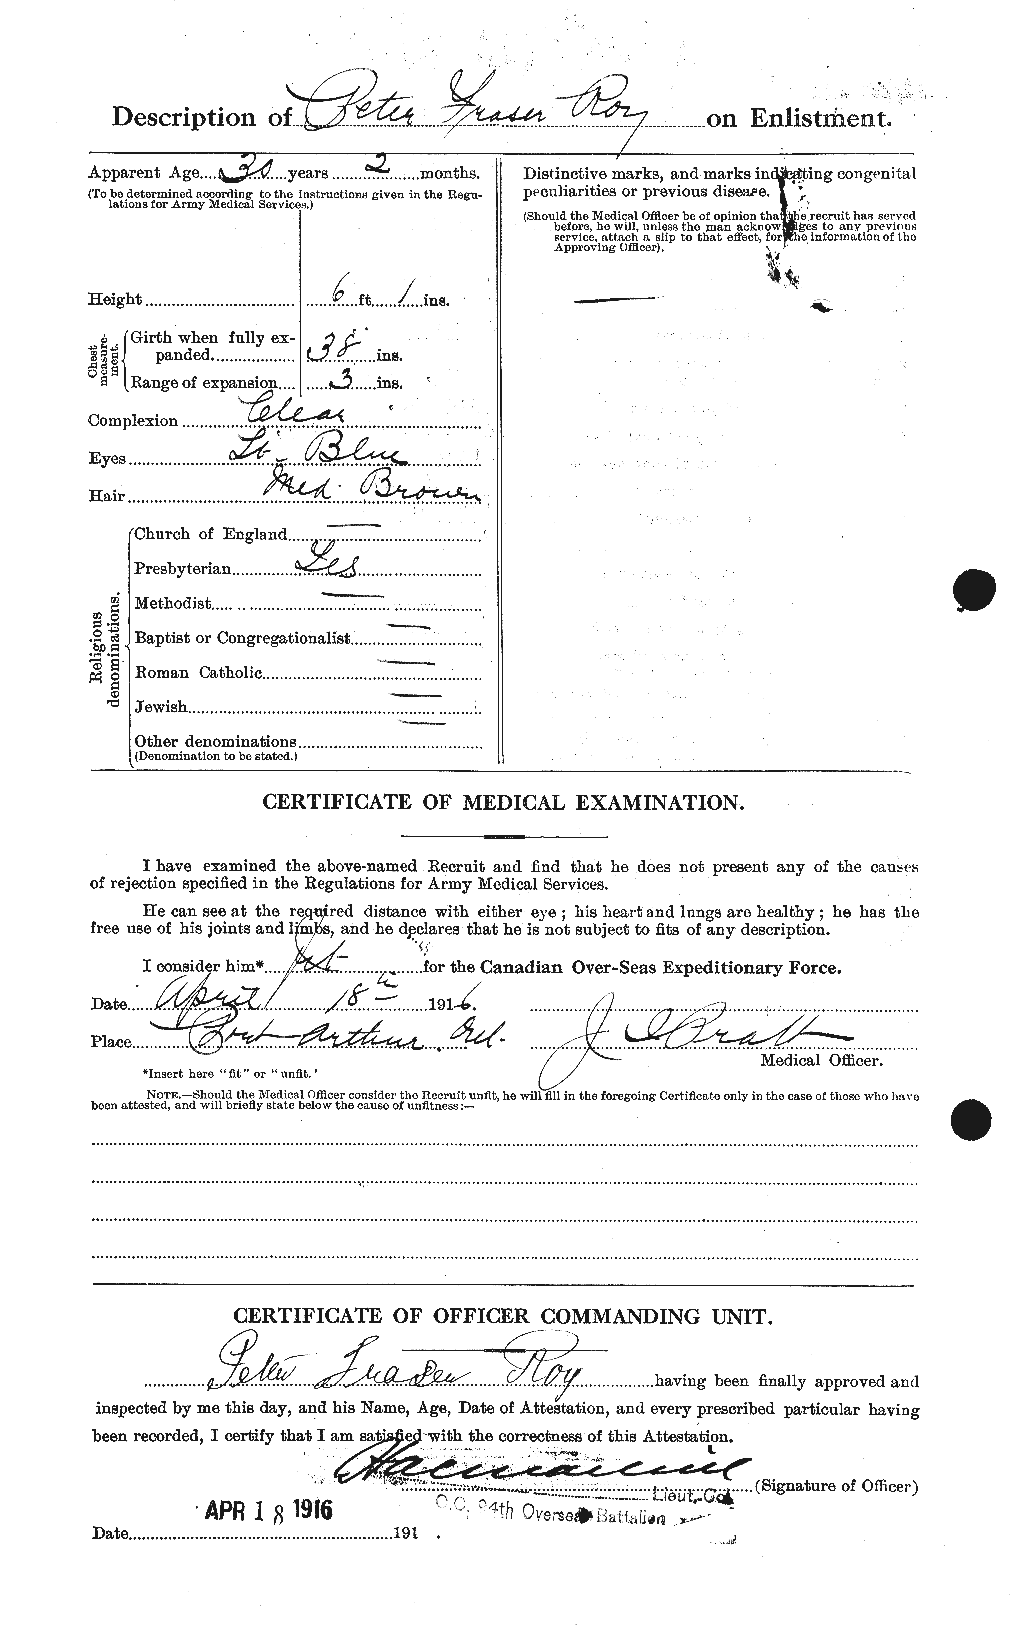 Personnel Records of the First World War - CEF 615212b